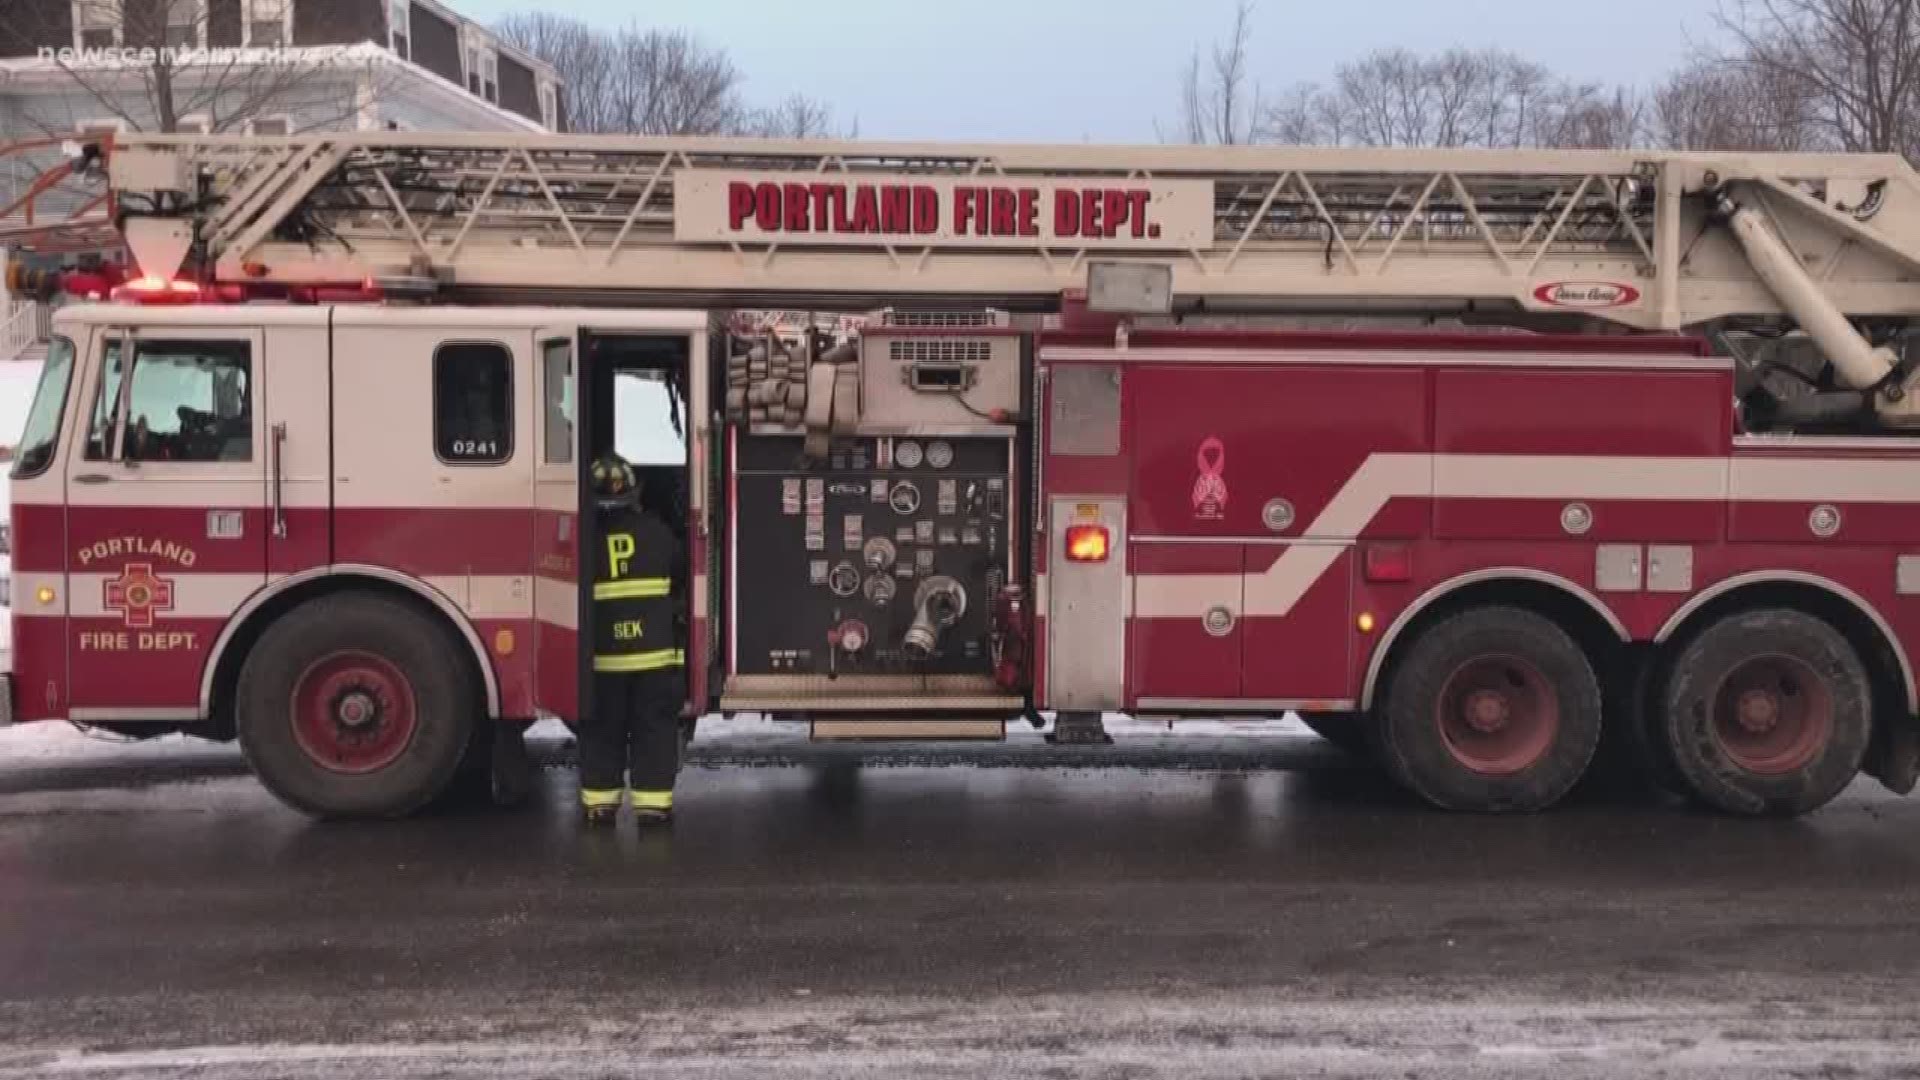 One person was found dead Monday at the scene of a fire on Ocean Avenue in Portland.